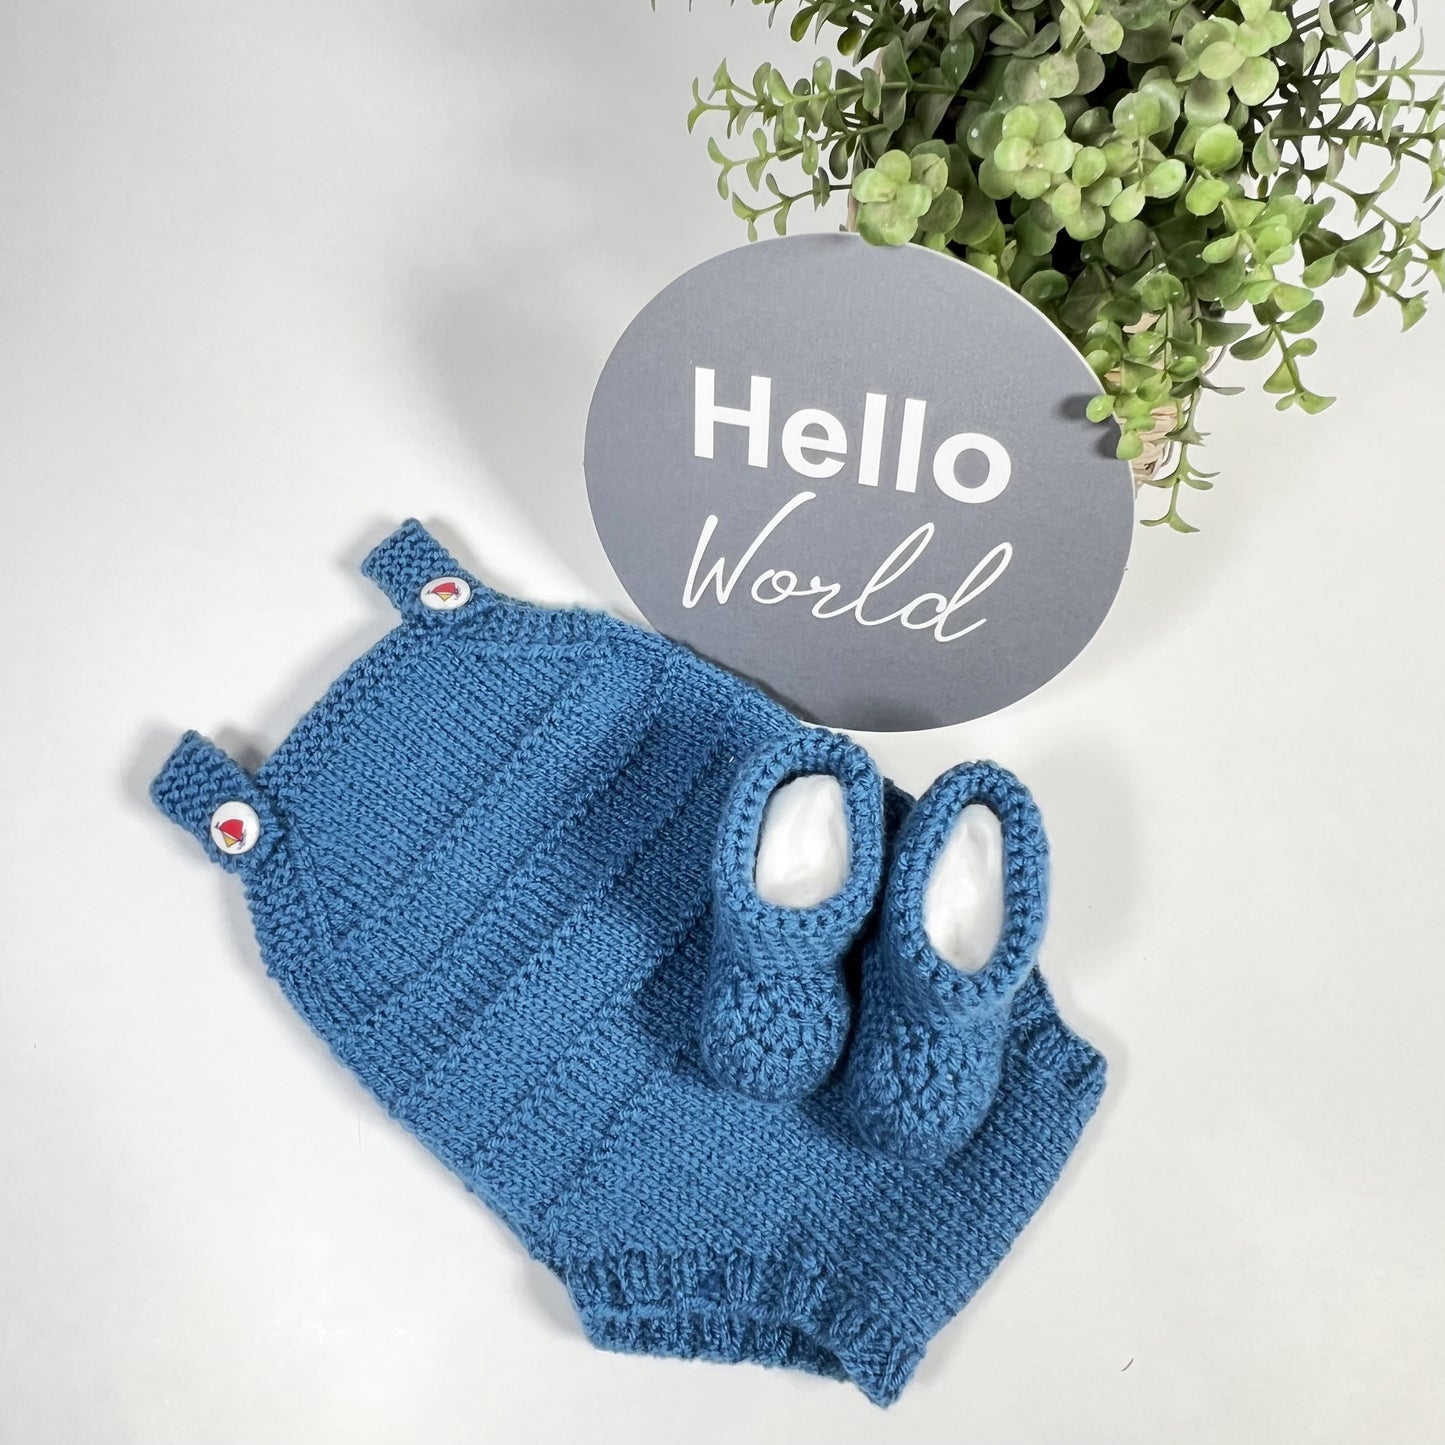 New Baby Boy Gift, Knitted Baby Romper And Matching Crocheted Baby Booties,  Baby Shower Gifts For Boys, New Mummy Presents